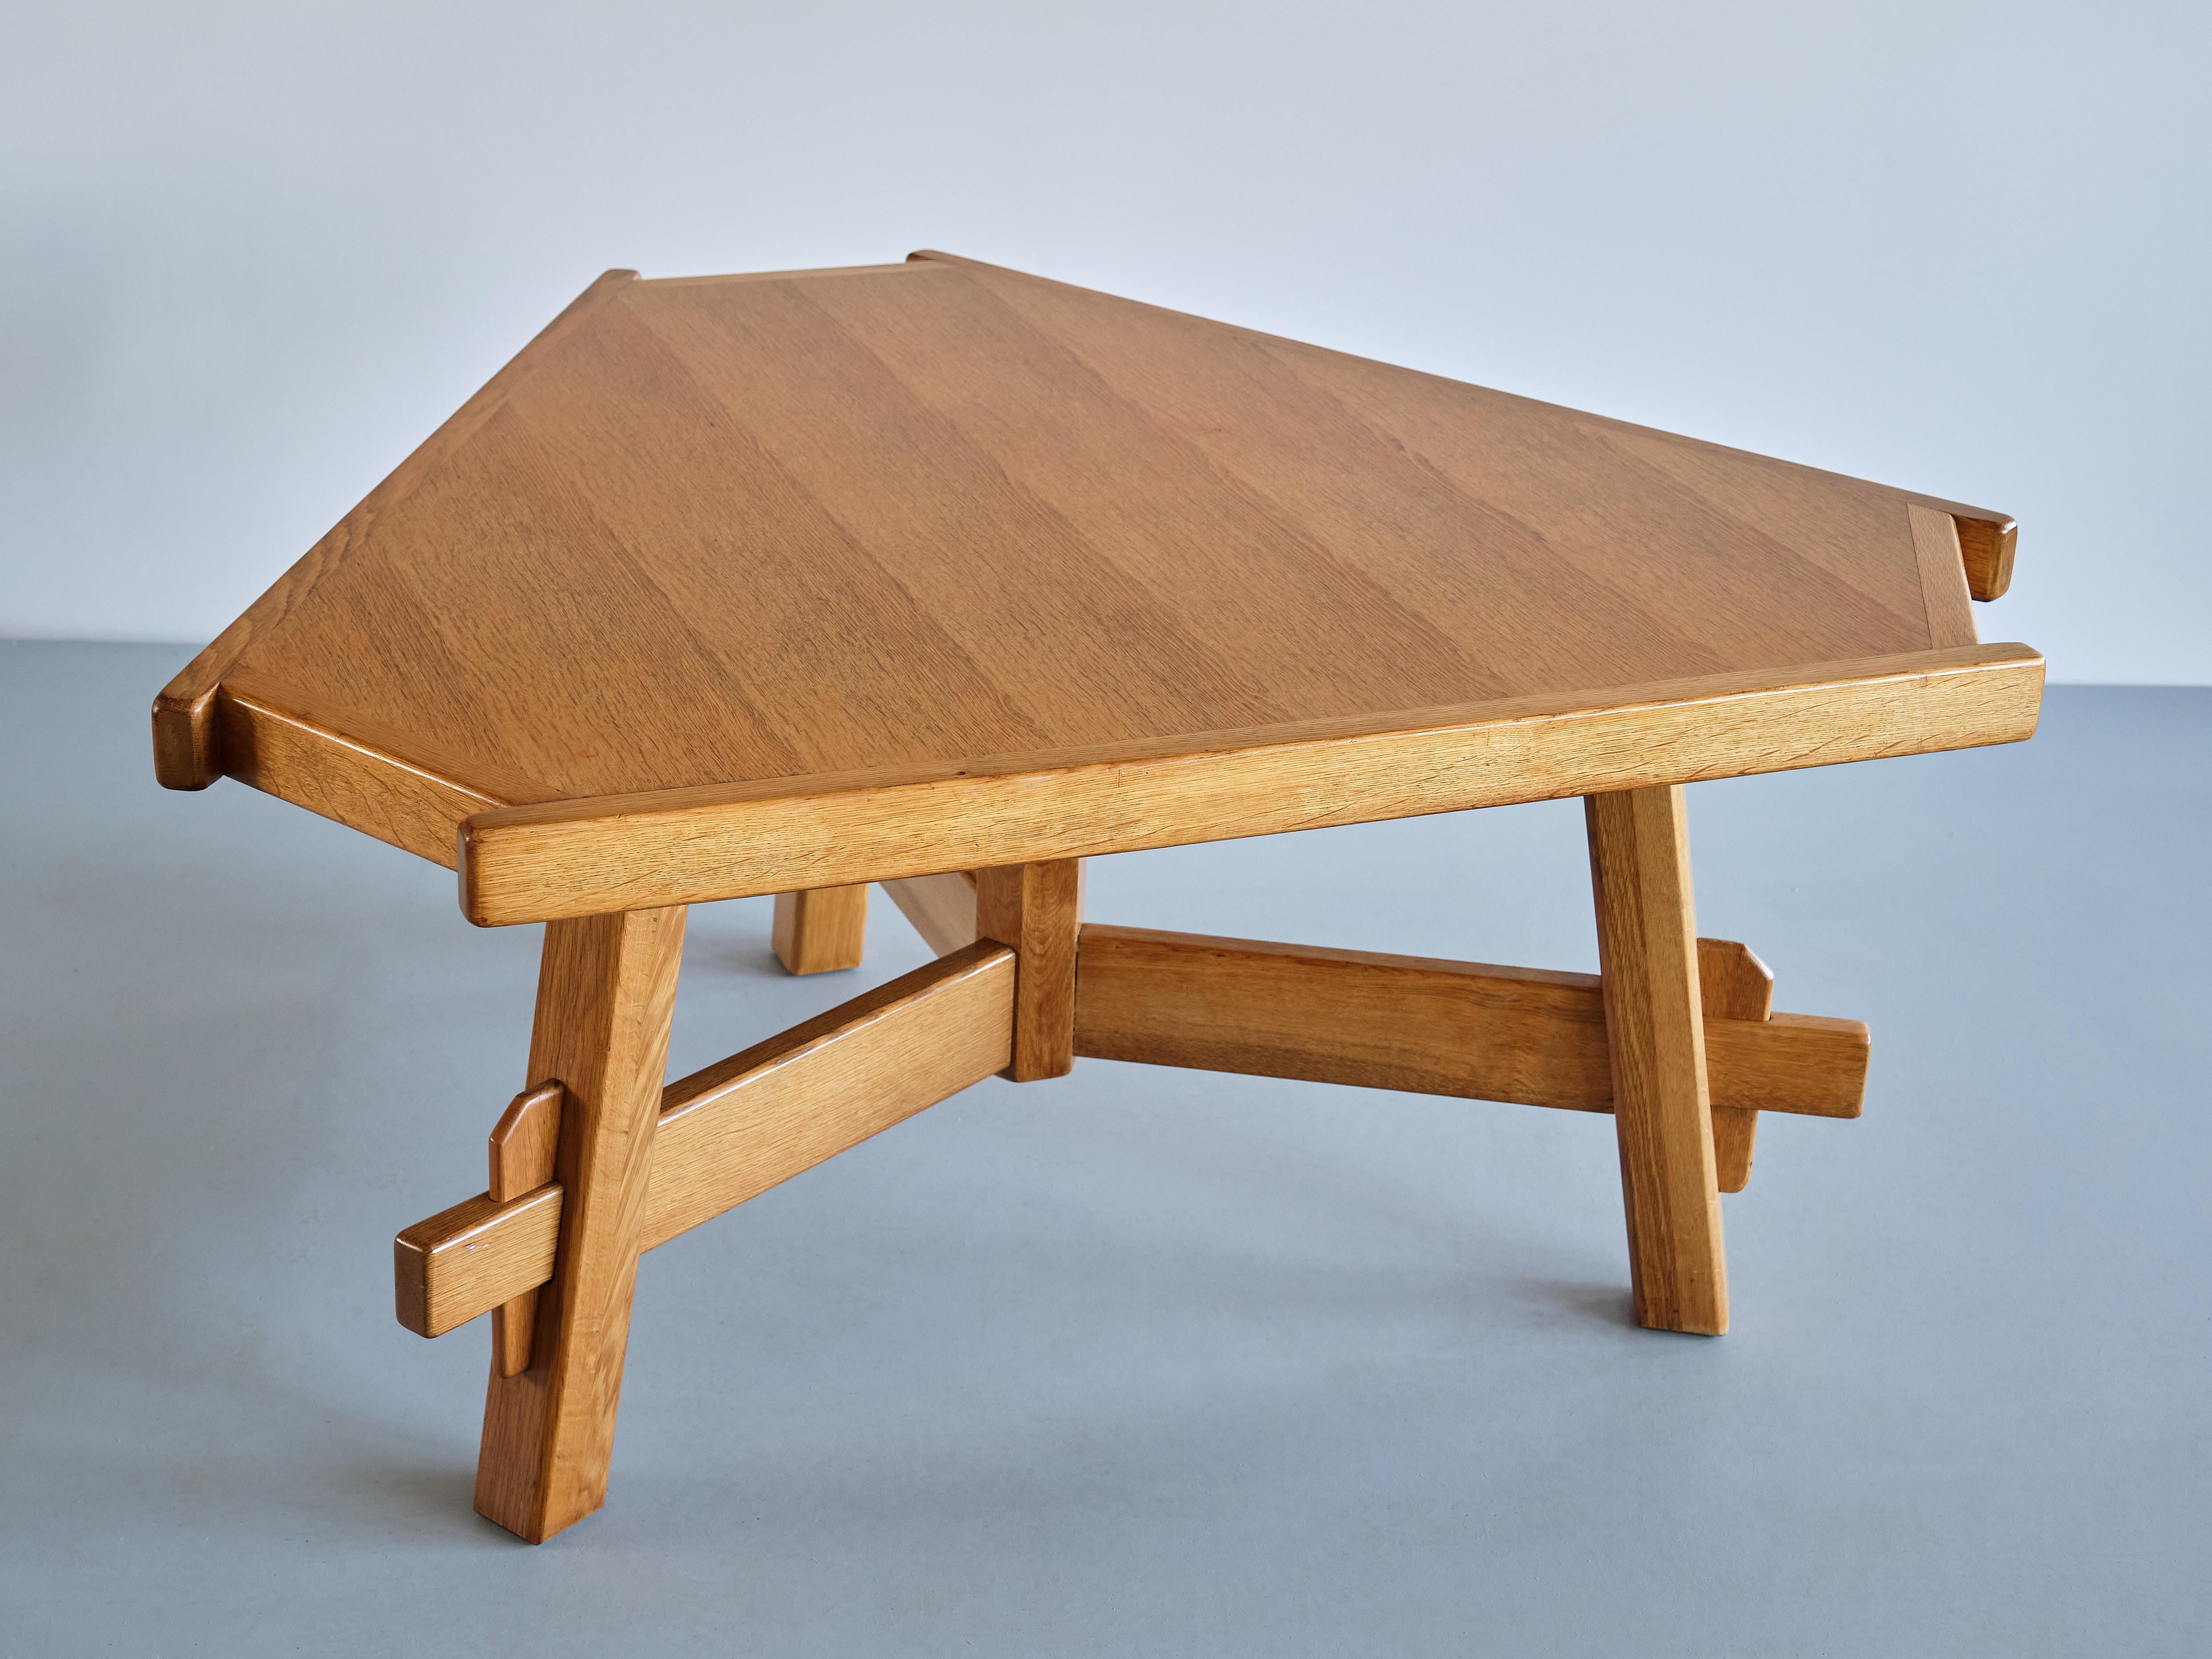 Triangular French Modern Dining Table in Solid Oak Wood, France, 1960s For Sale 10